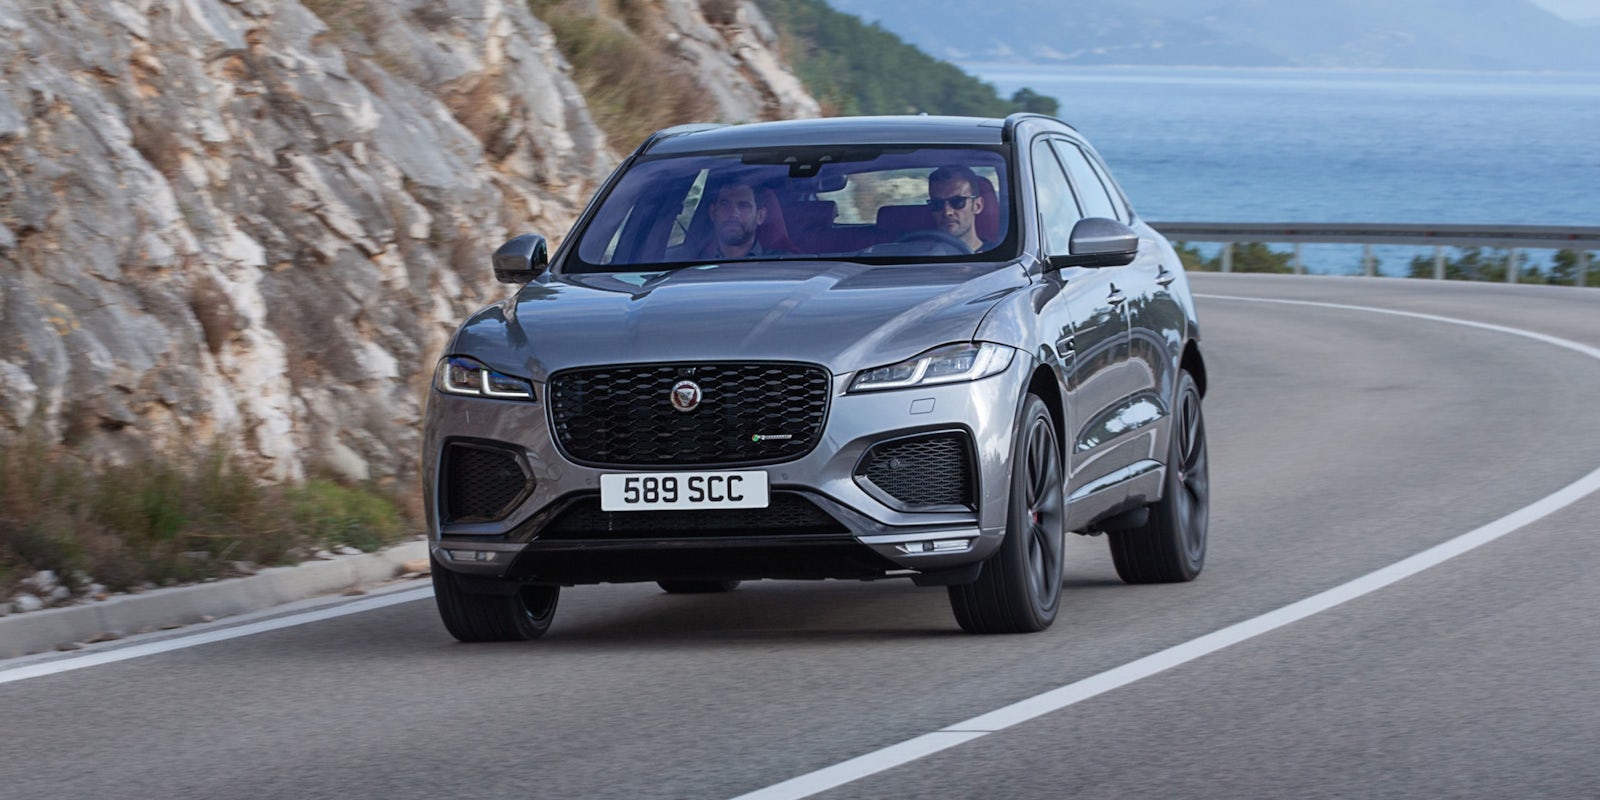 2021 Jaguar F Pace Hybrid Revealed Price Specs And Release Date Carwow